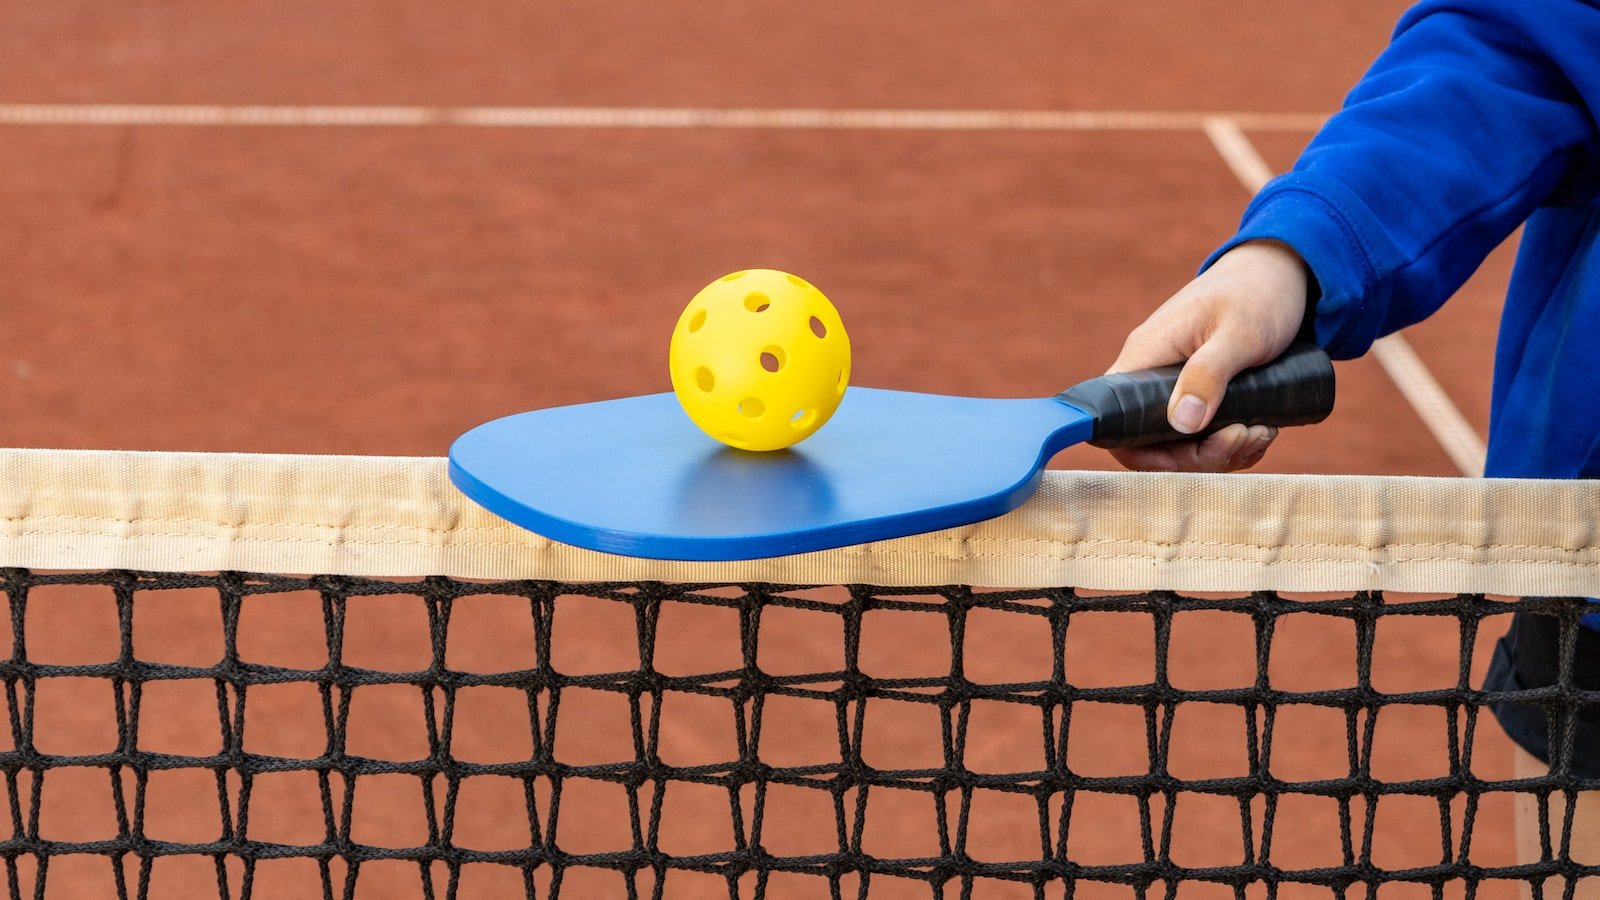 Warming Up with Target Practice: Improve Hand-Eye Coordination for Quick Reflexes in Pickleball